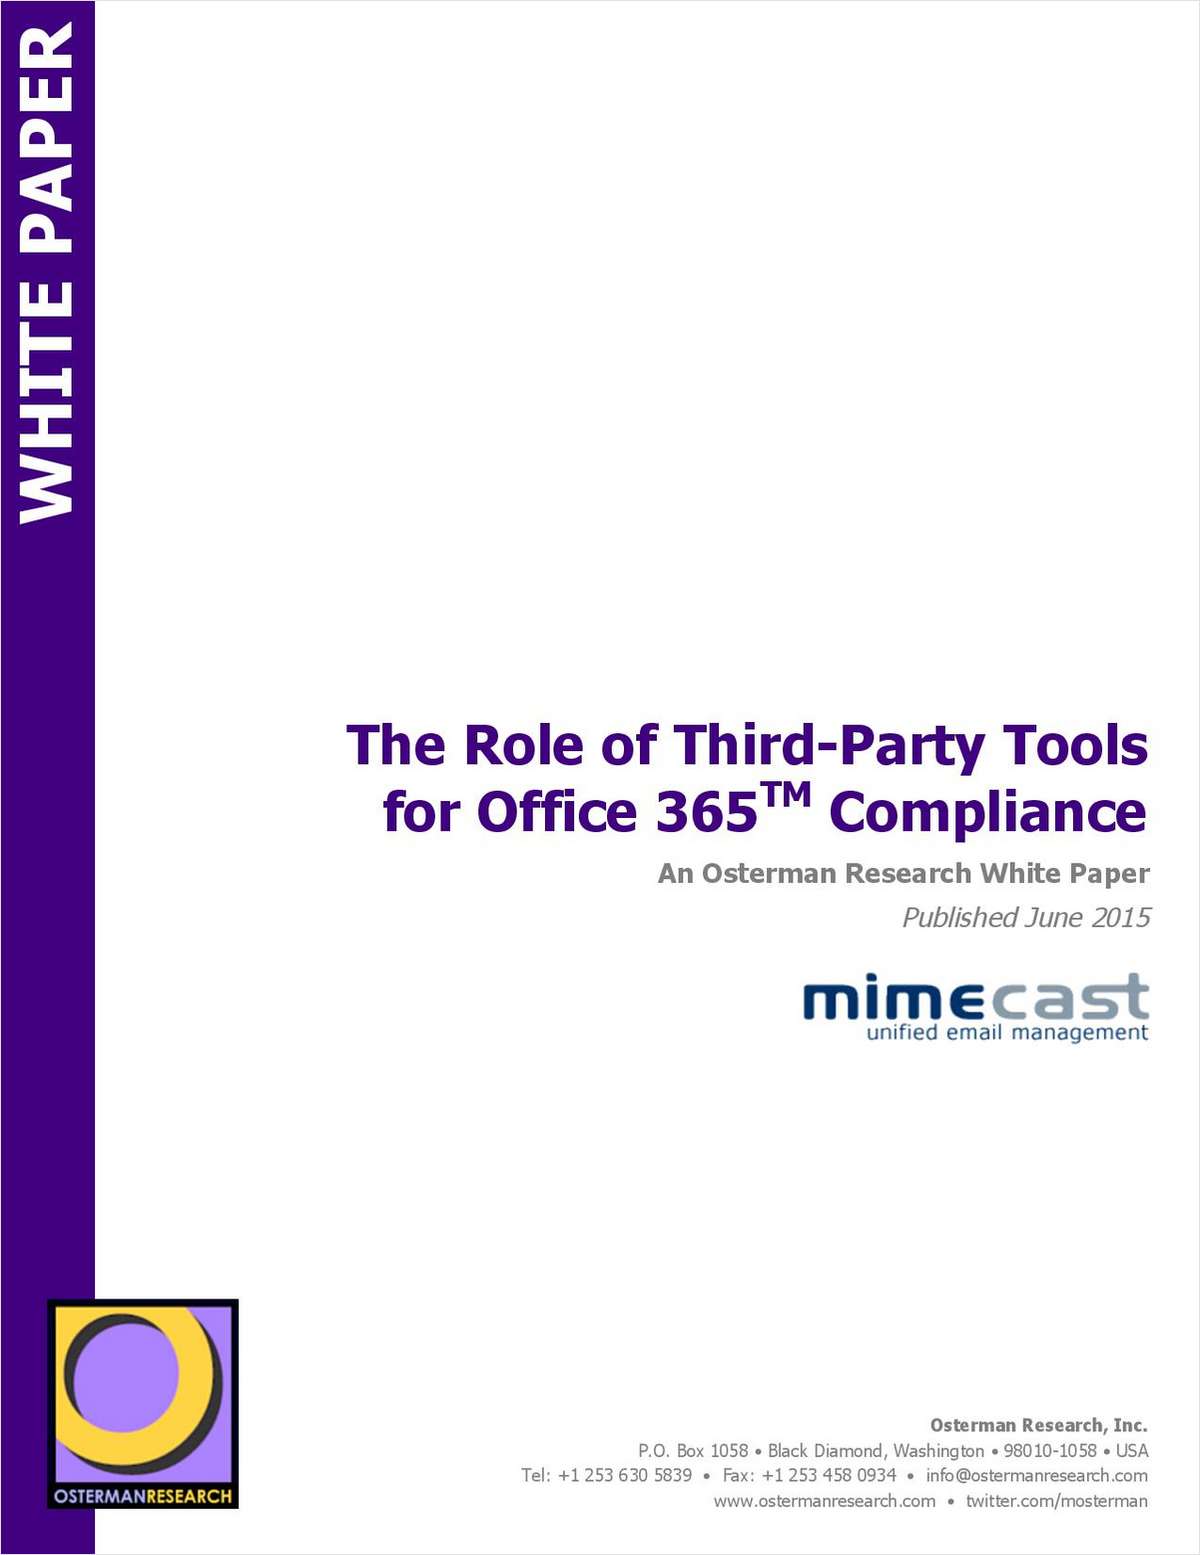 The Role of Third-Party Tools for Office 365 Compliance